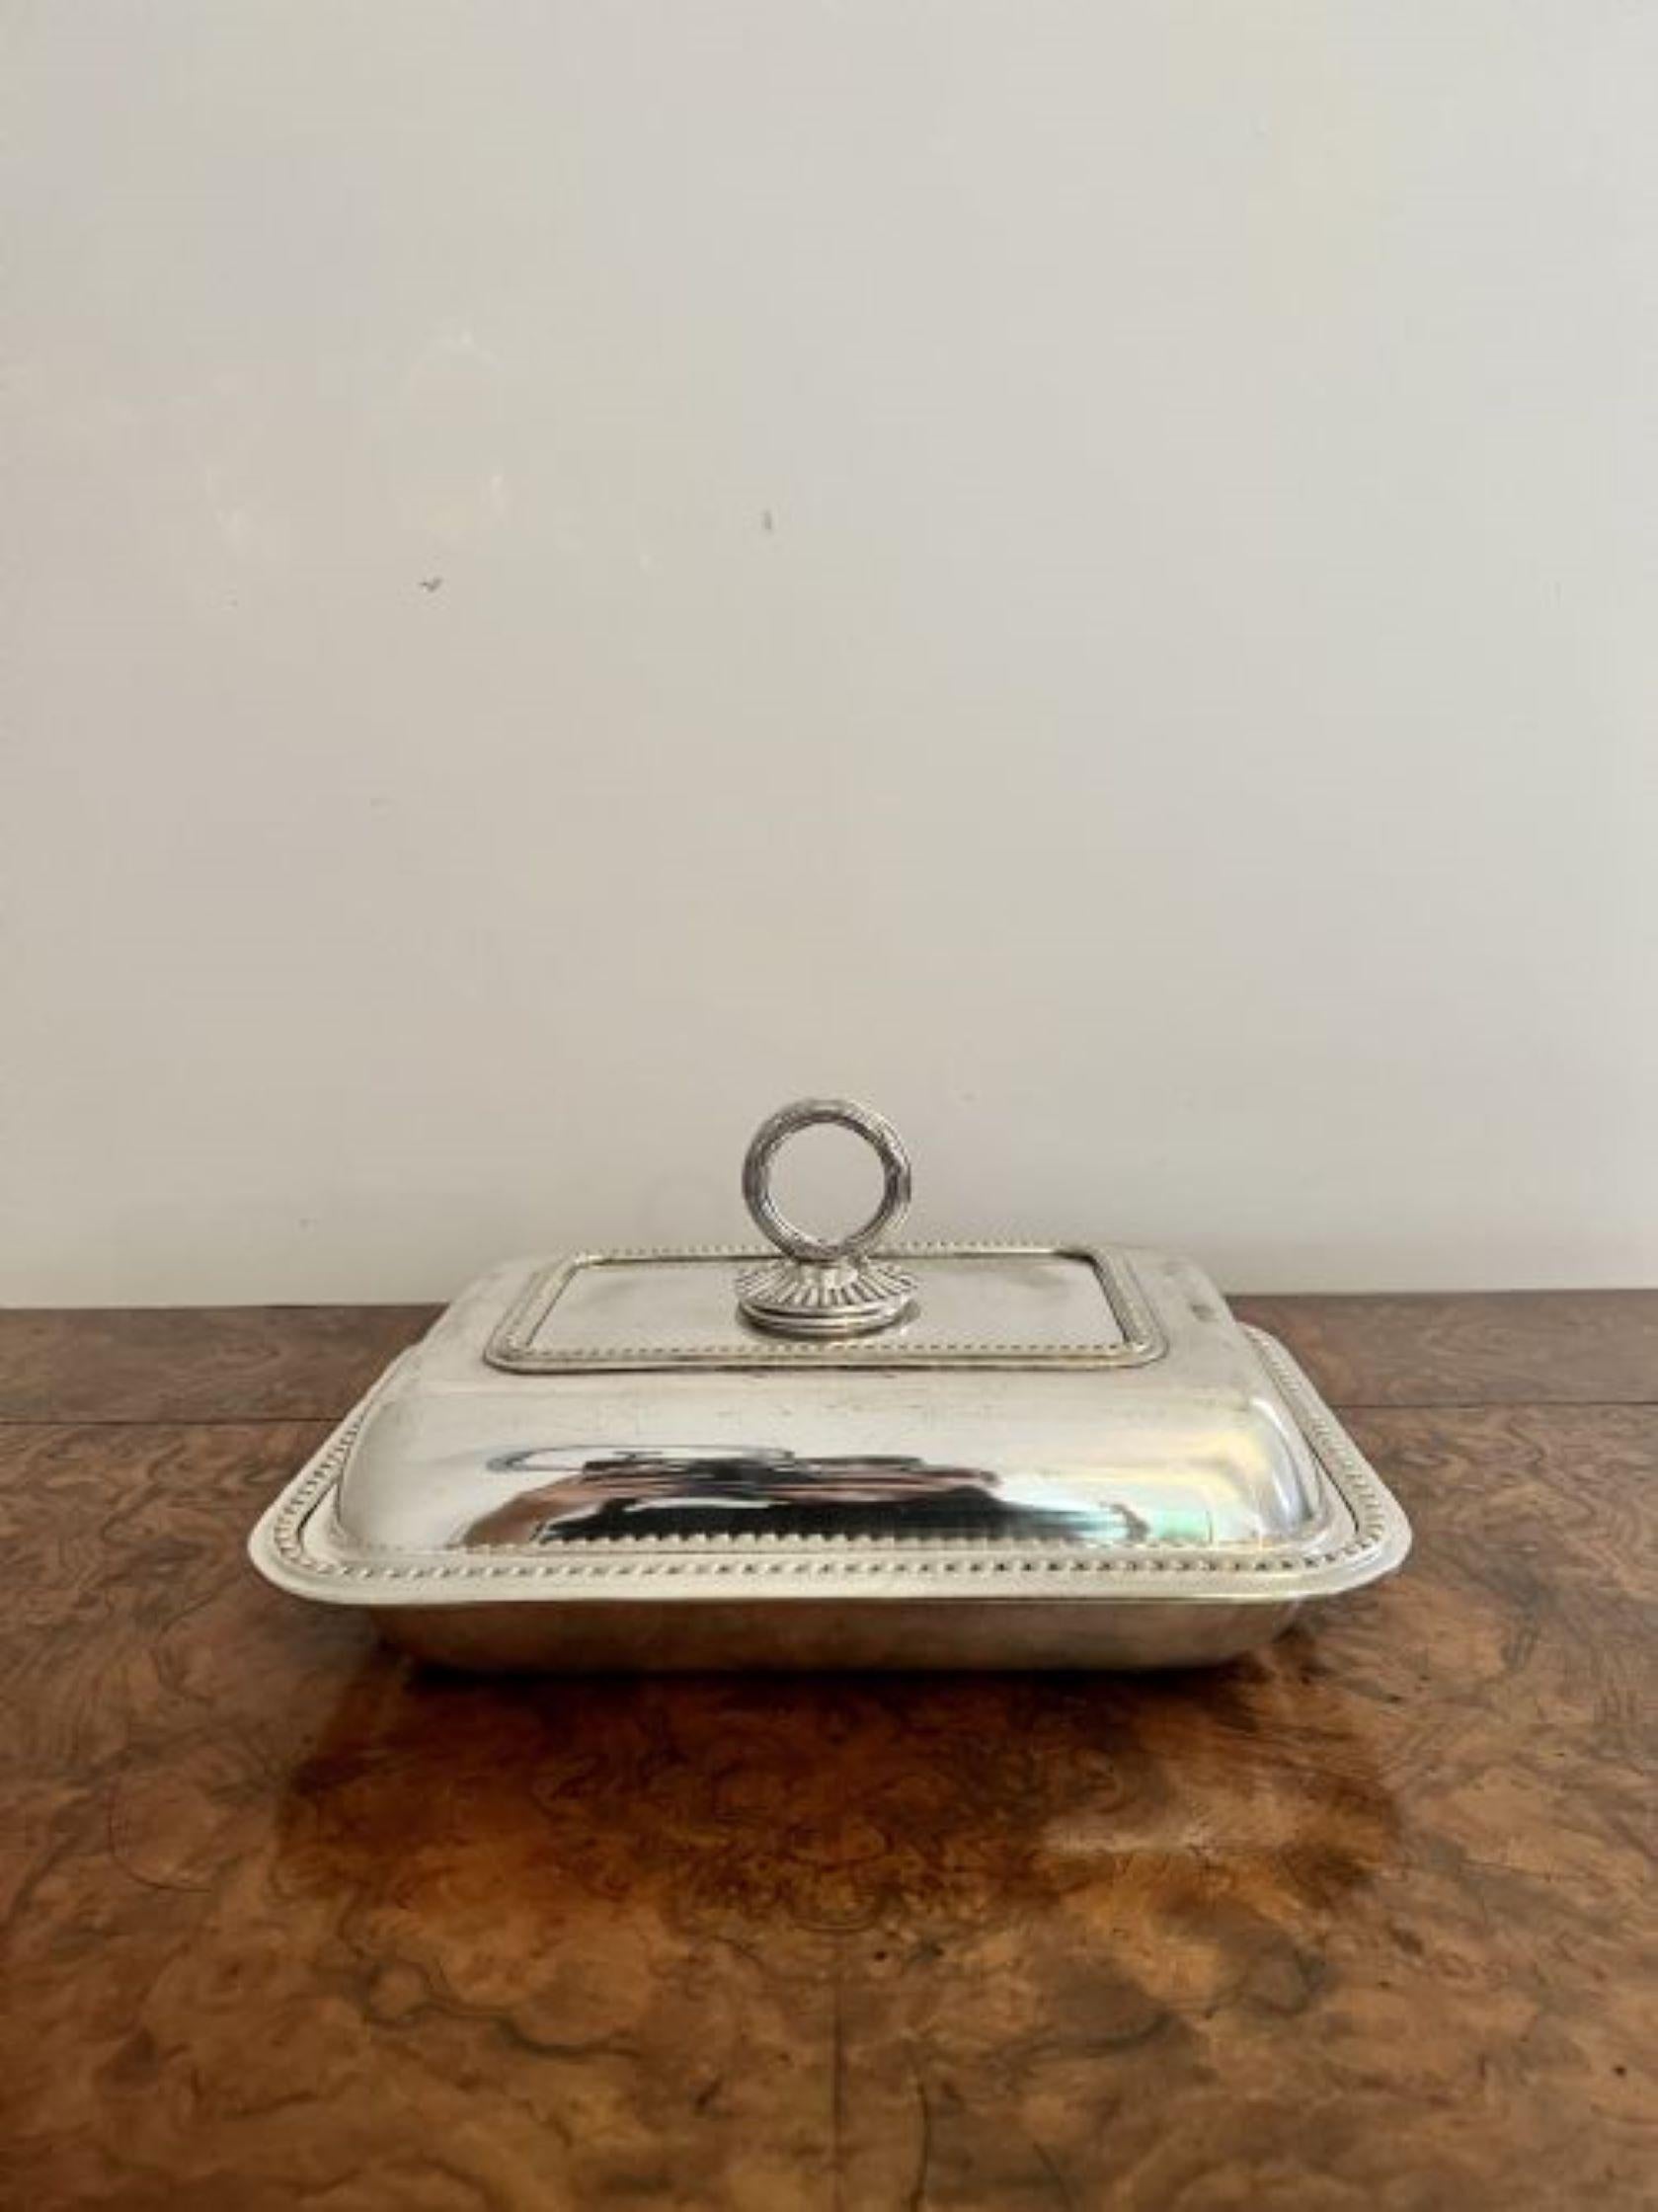 Antique Edwardian silver plated entree dish having a quality antique Edwardian silver plated entree dish, rectangular in shape with an ornate removable handle to the top and a removable lid.